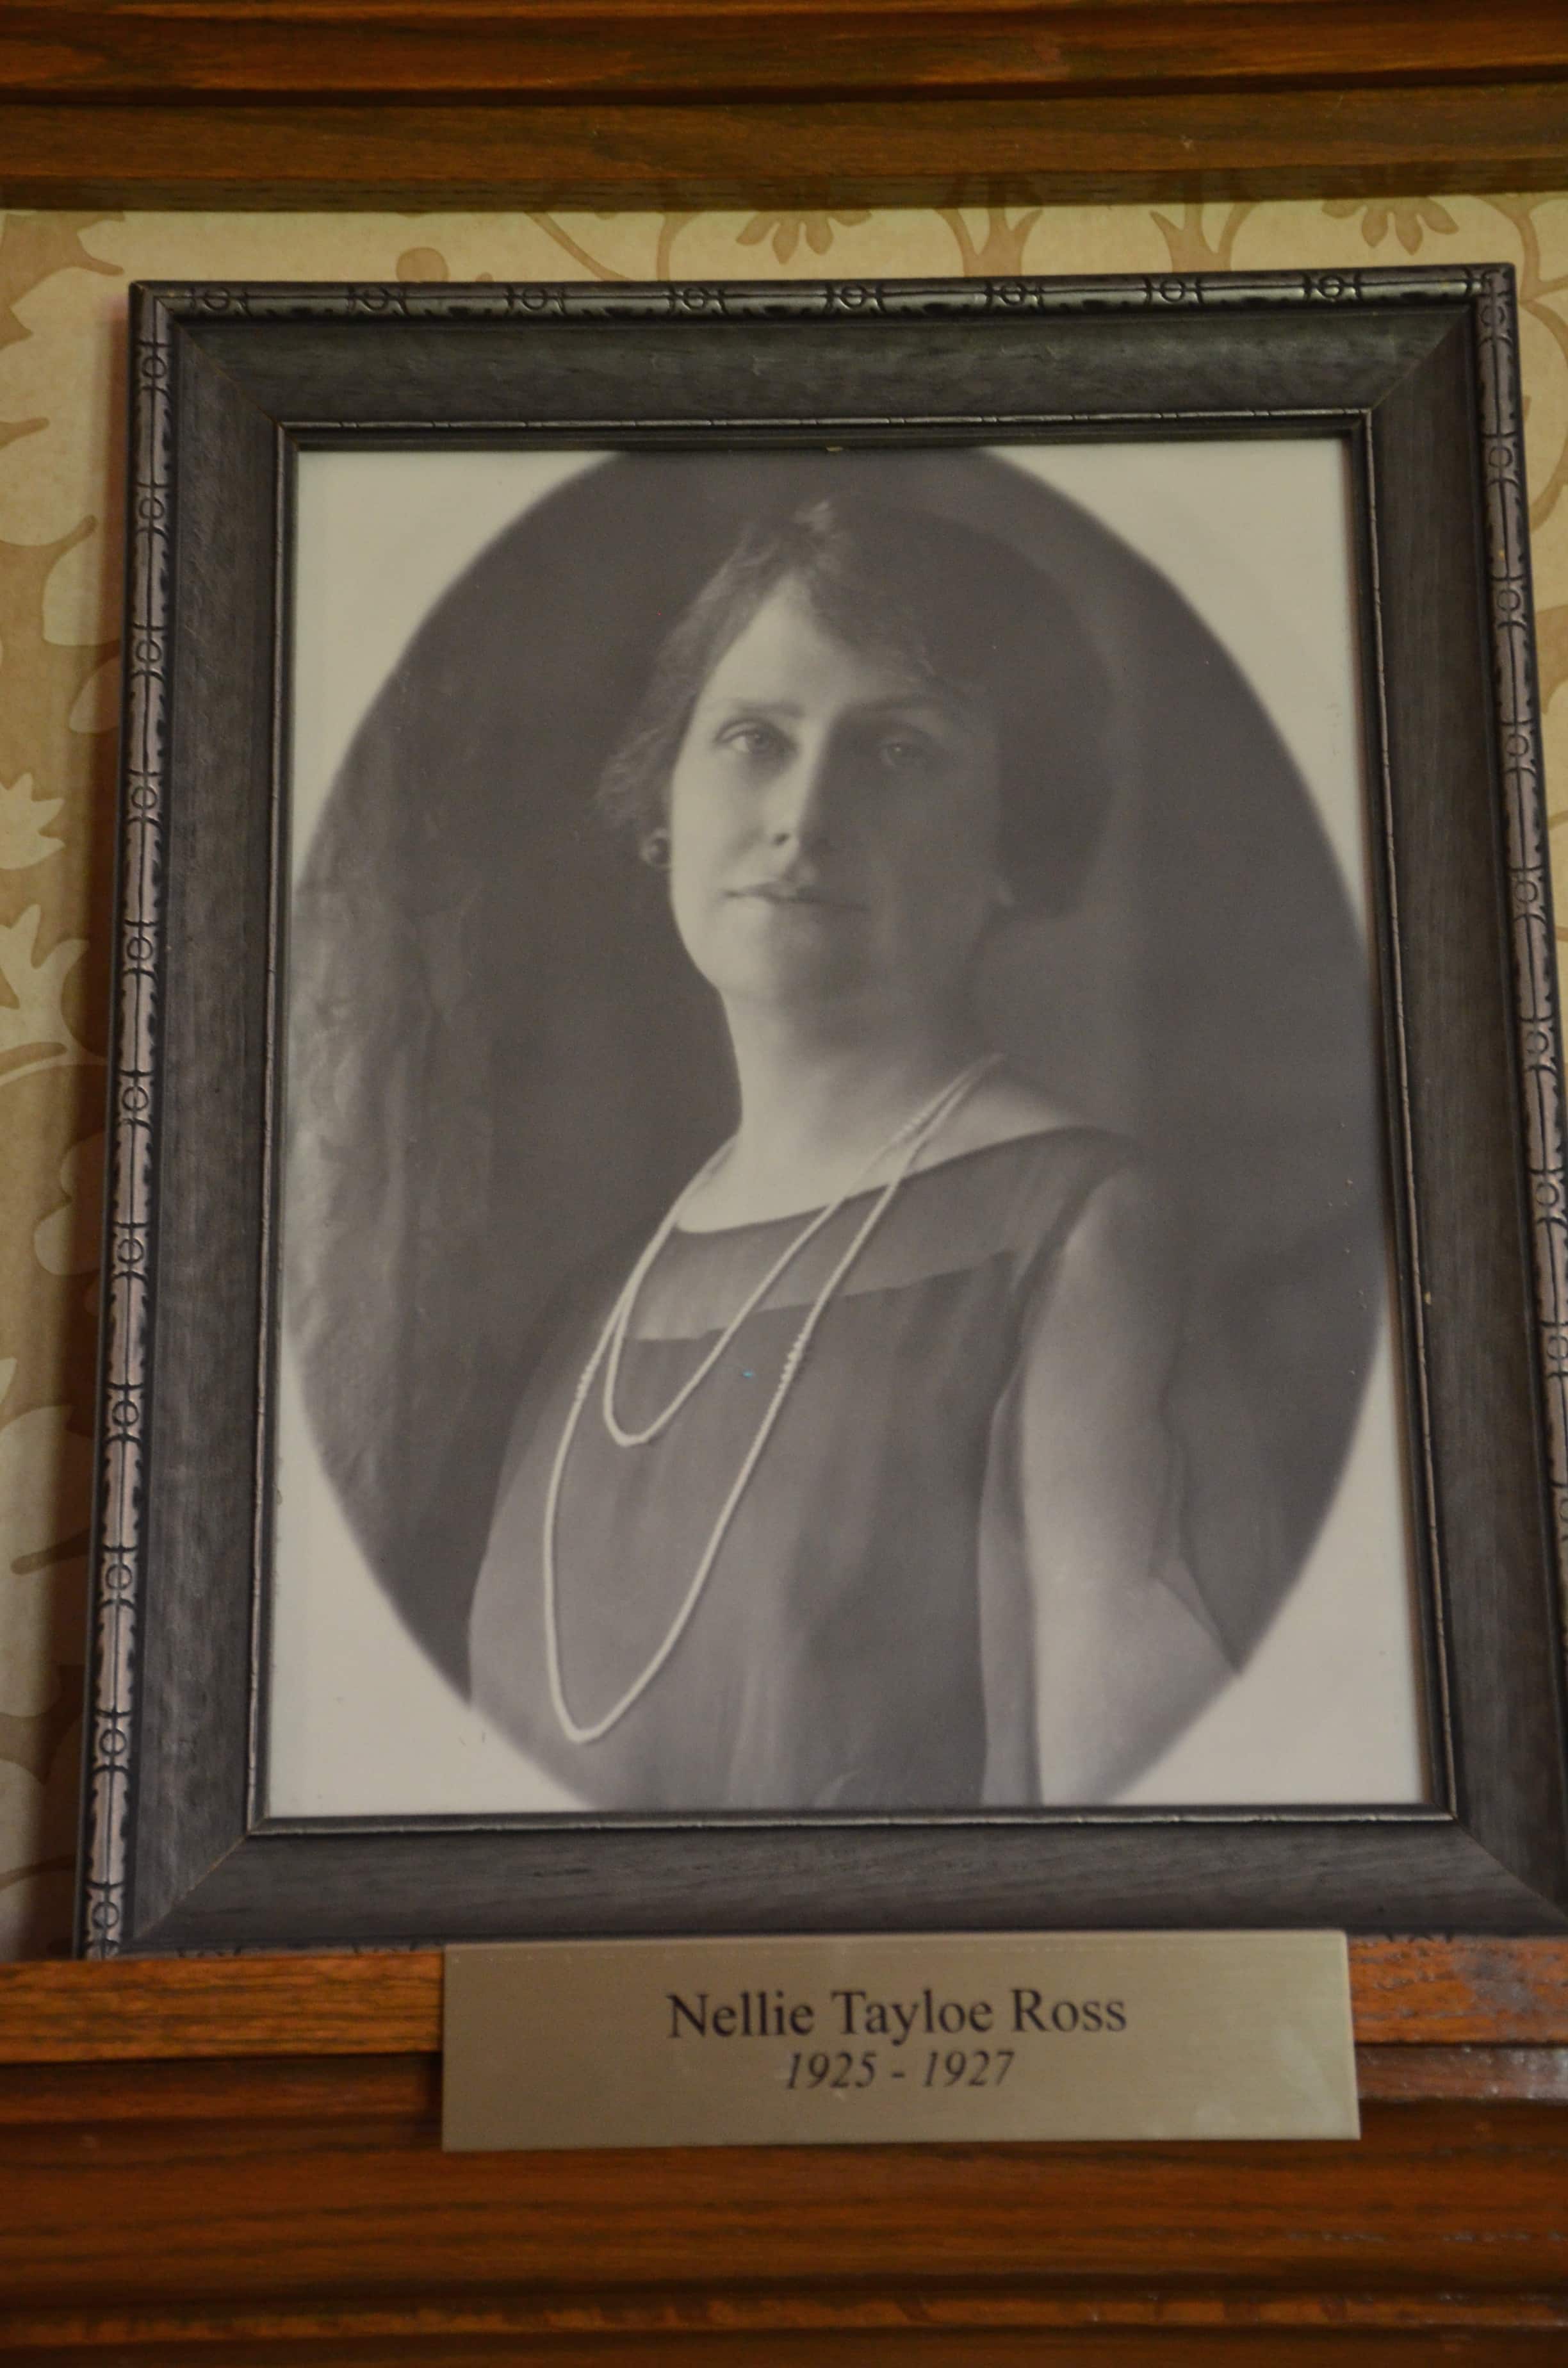 Nellie Tayloe Ross in the Wyoming Governor's Mansion in Cheyenne